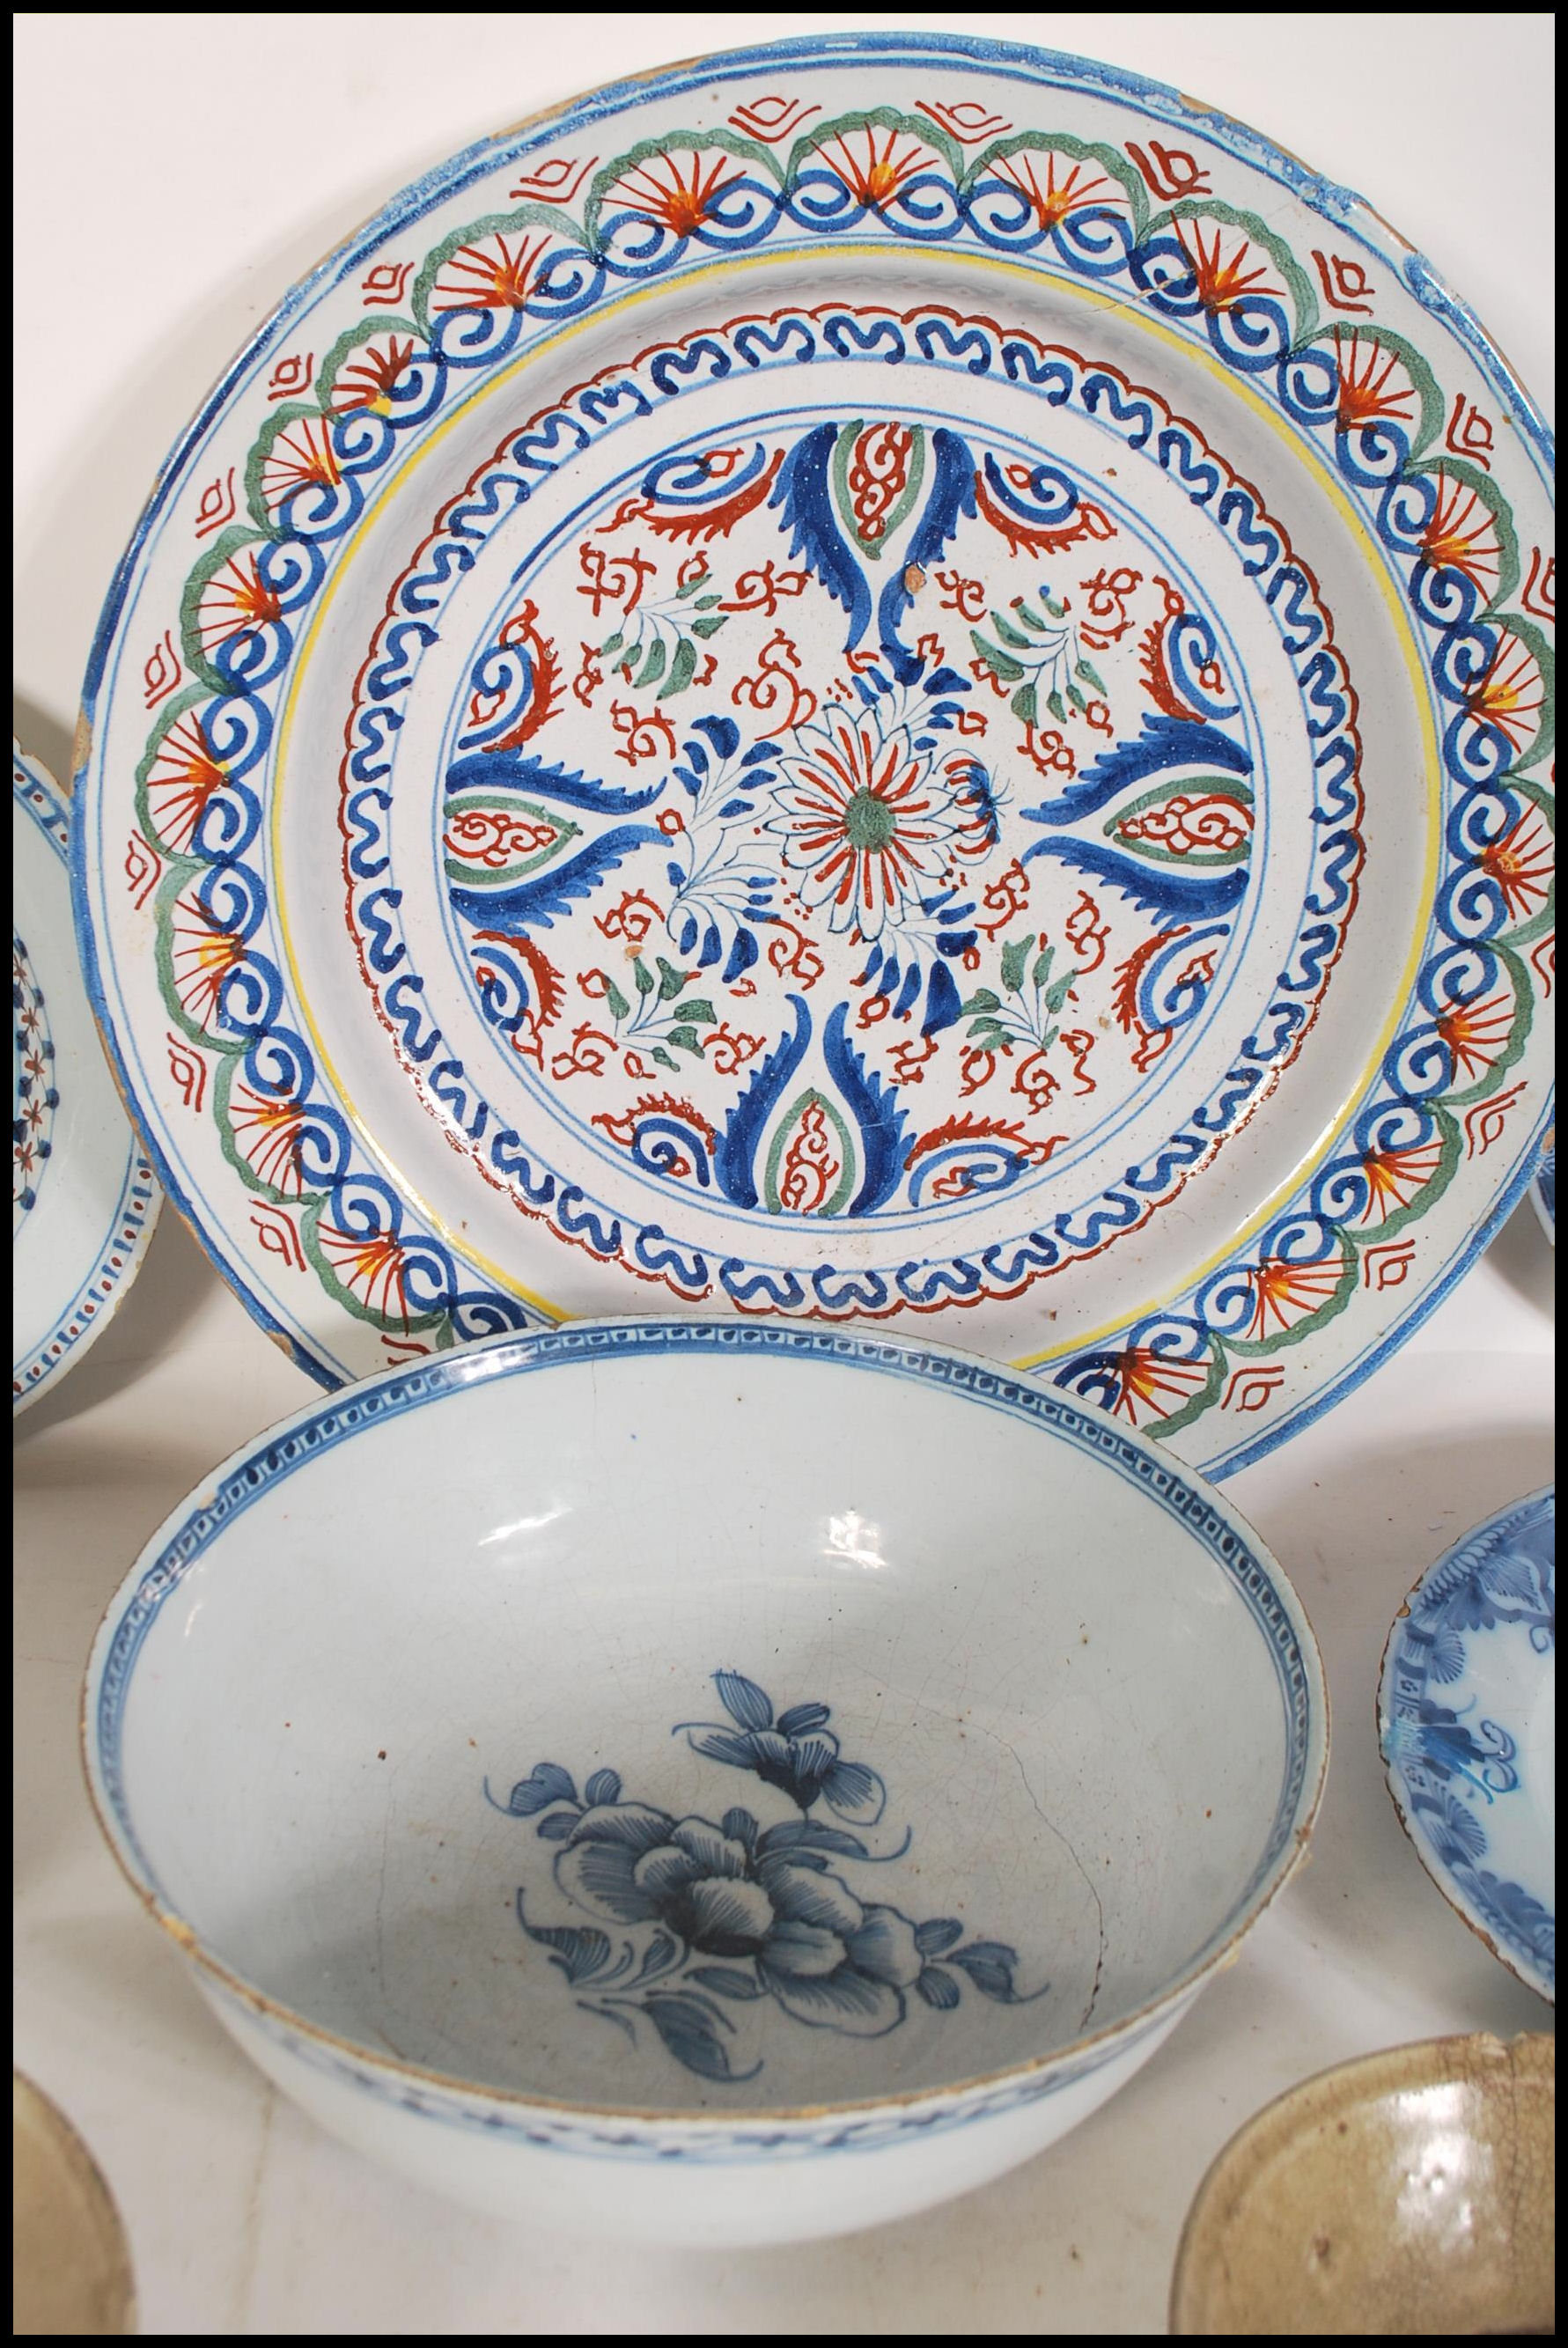 A collection of 18th century and 19th century Delft to include an 18th century blue and white dragon - Image 4 of 7